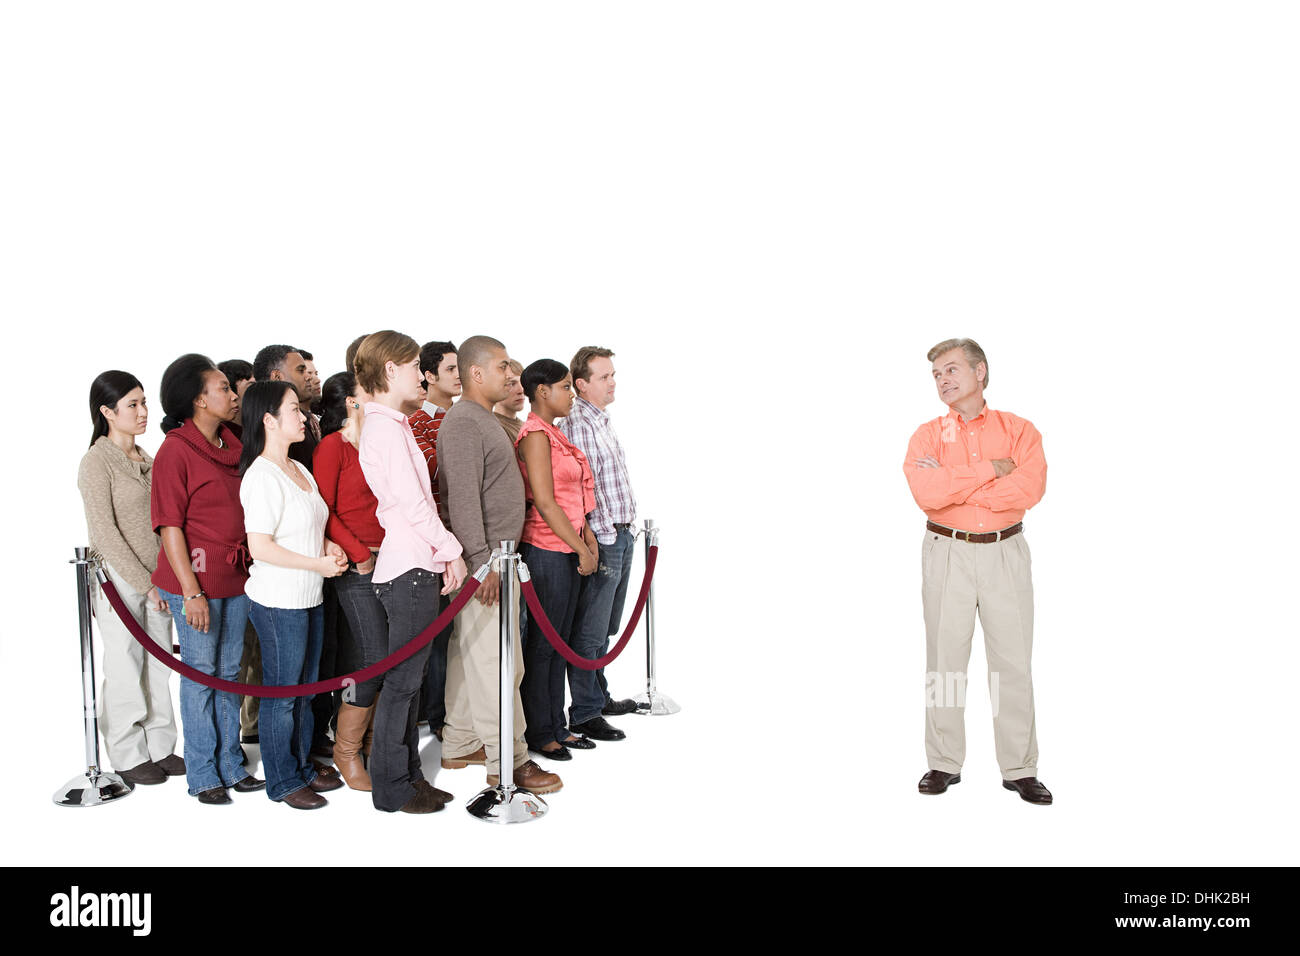 A mature man standing out from the crowd Stock Photo